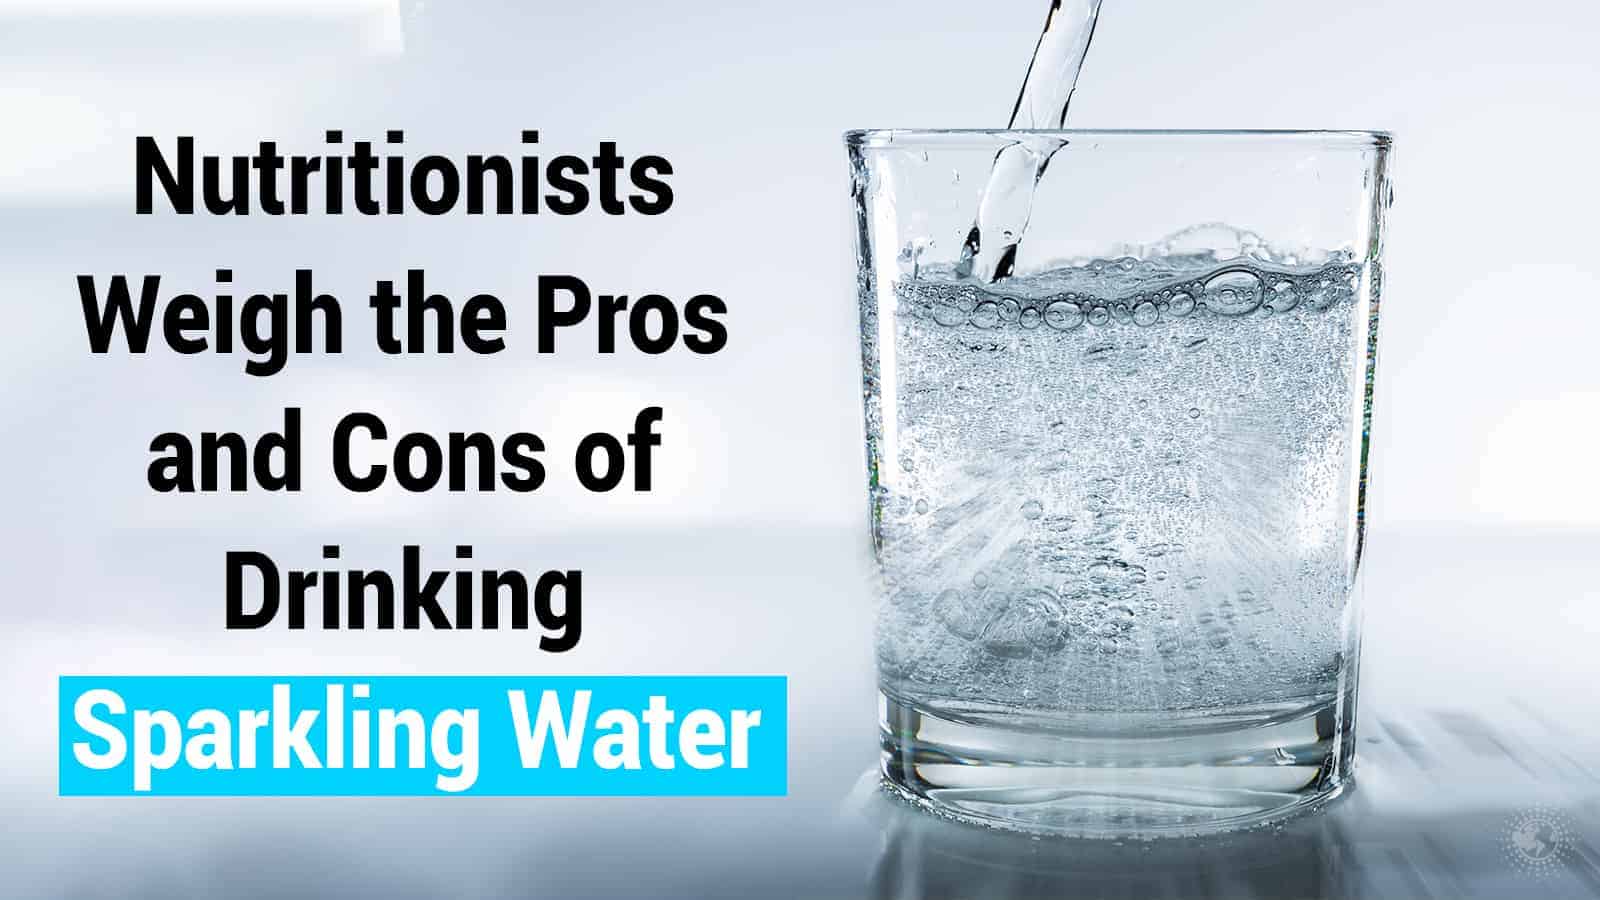 Nutritionists Weigh the Pros and Cons of Drinking Sparkling Water